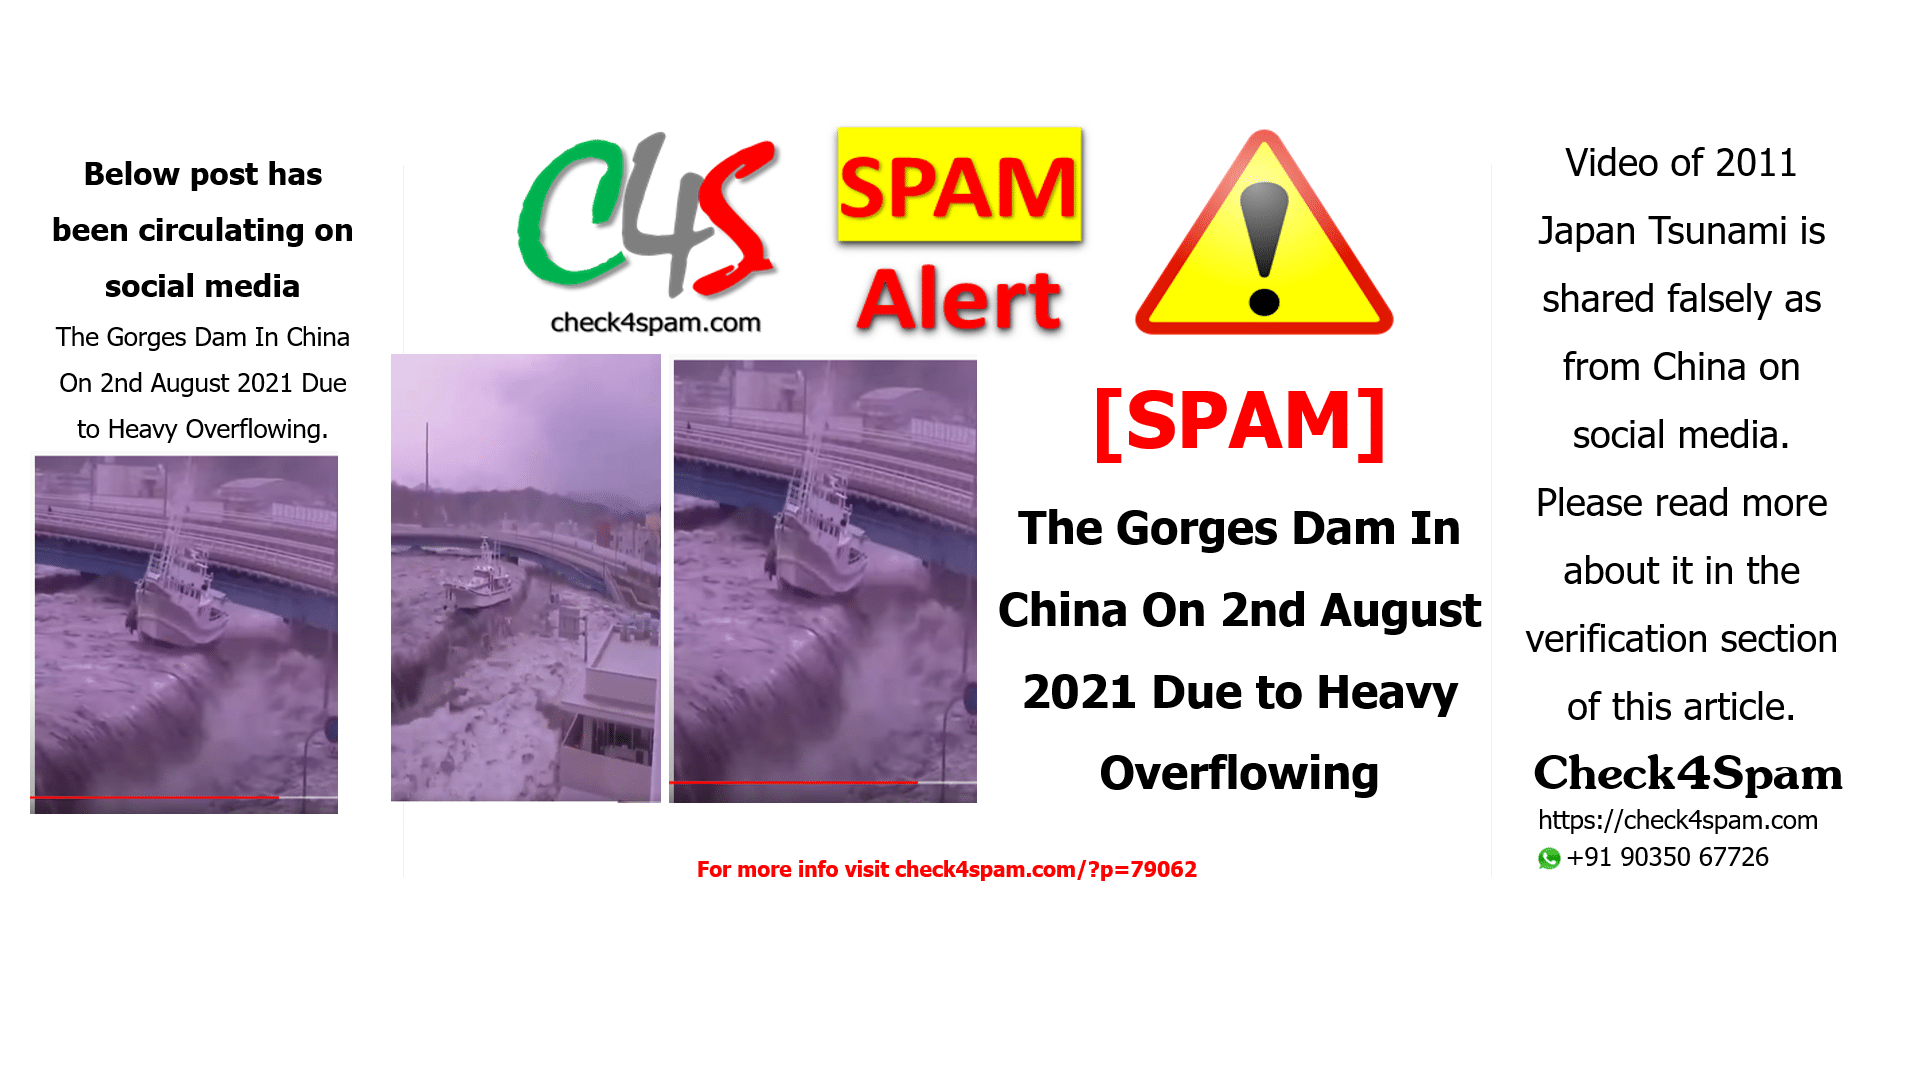 The Gorges Dam In China On 2nd August 2021 Due to Heavy Overflowing